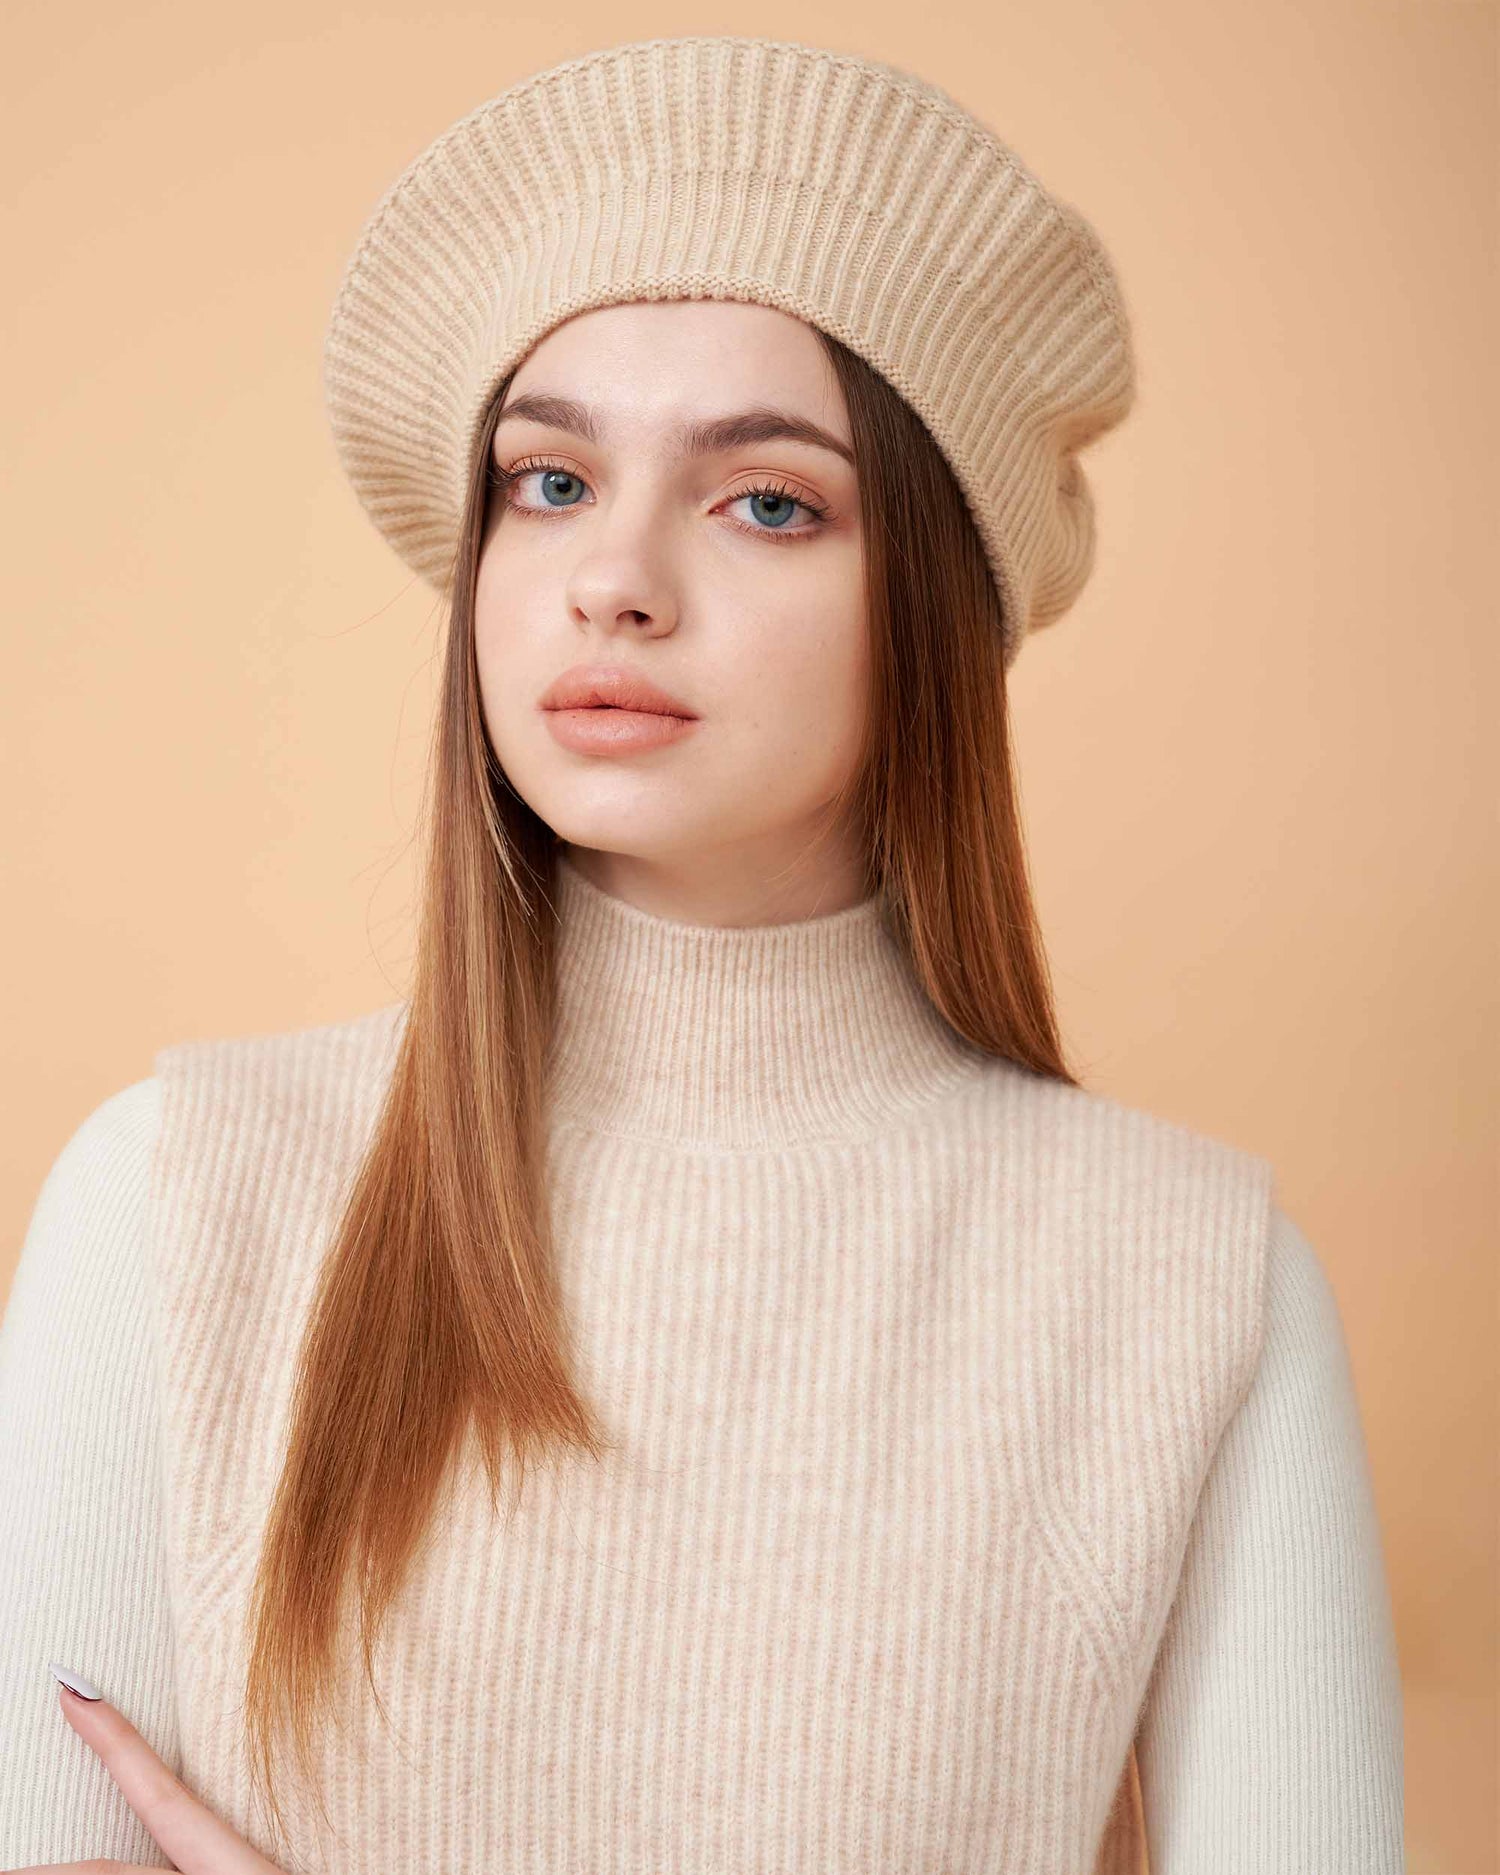 Cashmere Hat , High Quality Hat , Cashmere Beige Hat , 100% Cashmere Hat , Hat For All Seasons , Made By Davinii , Front Image 